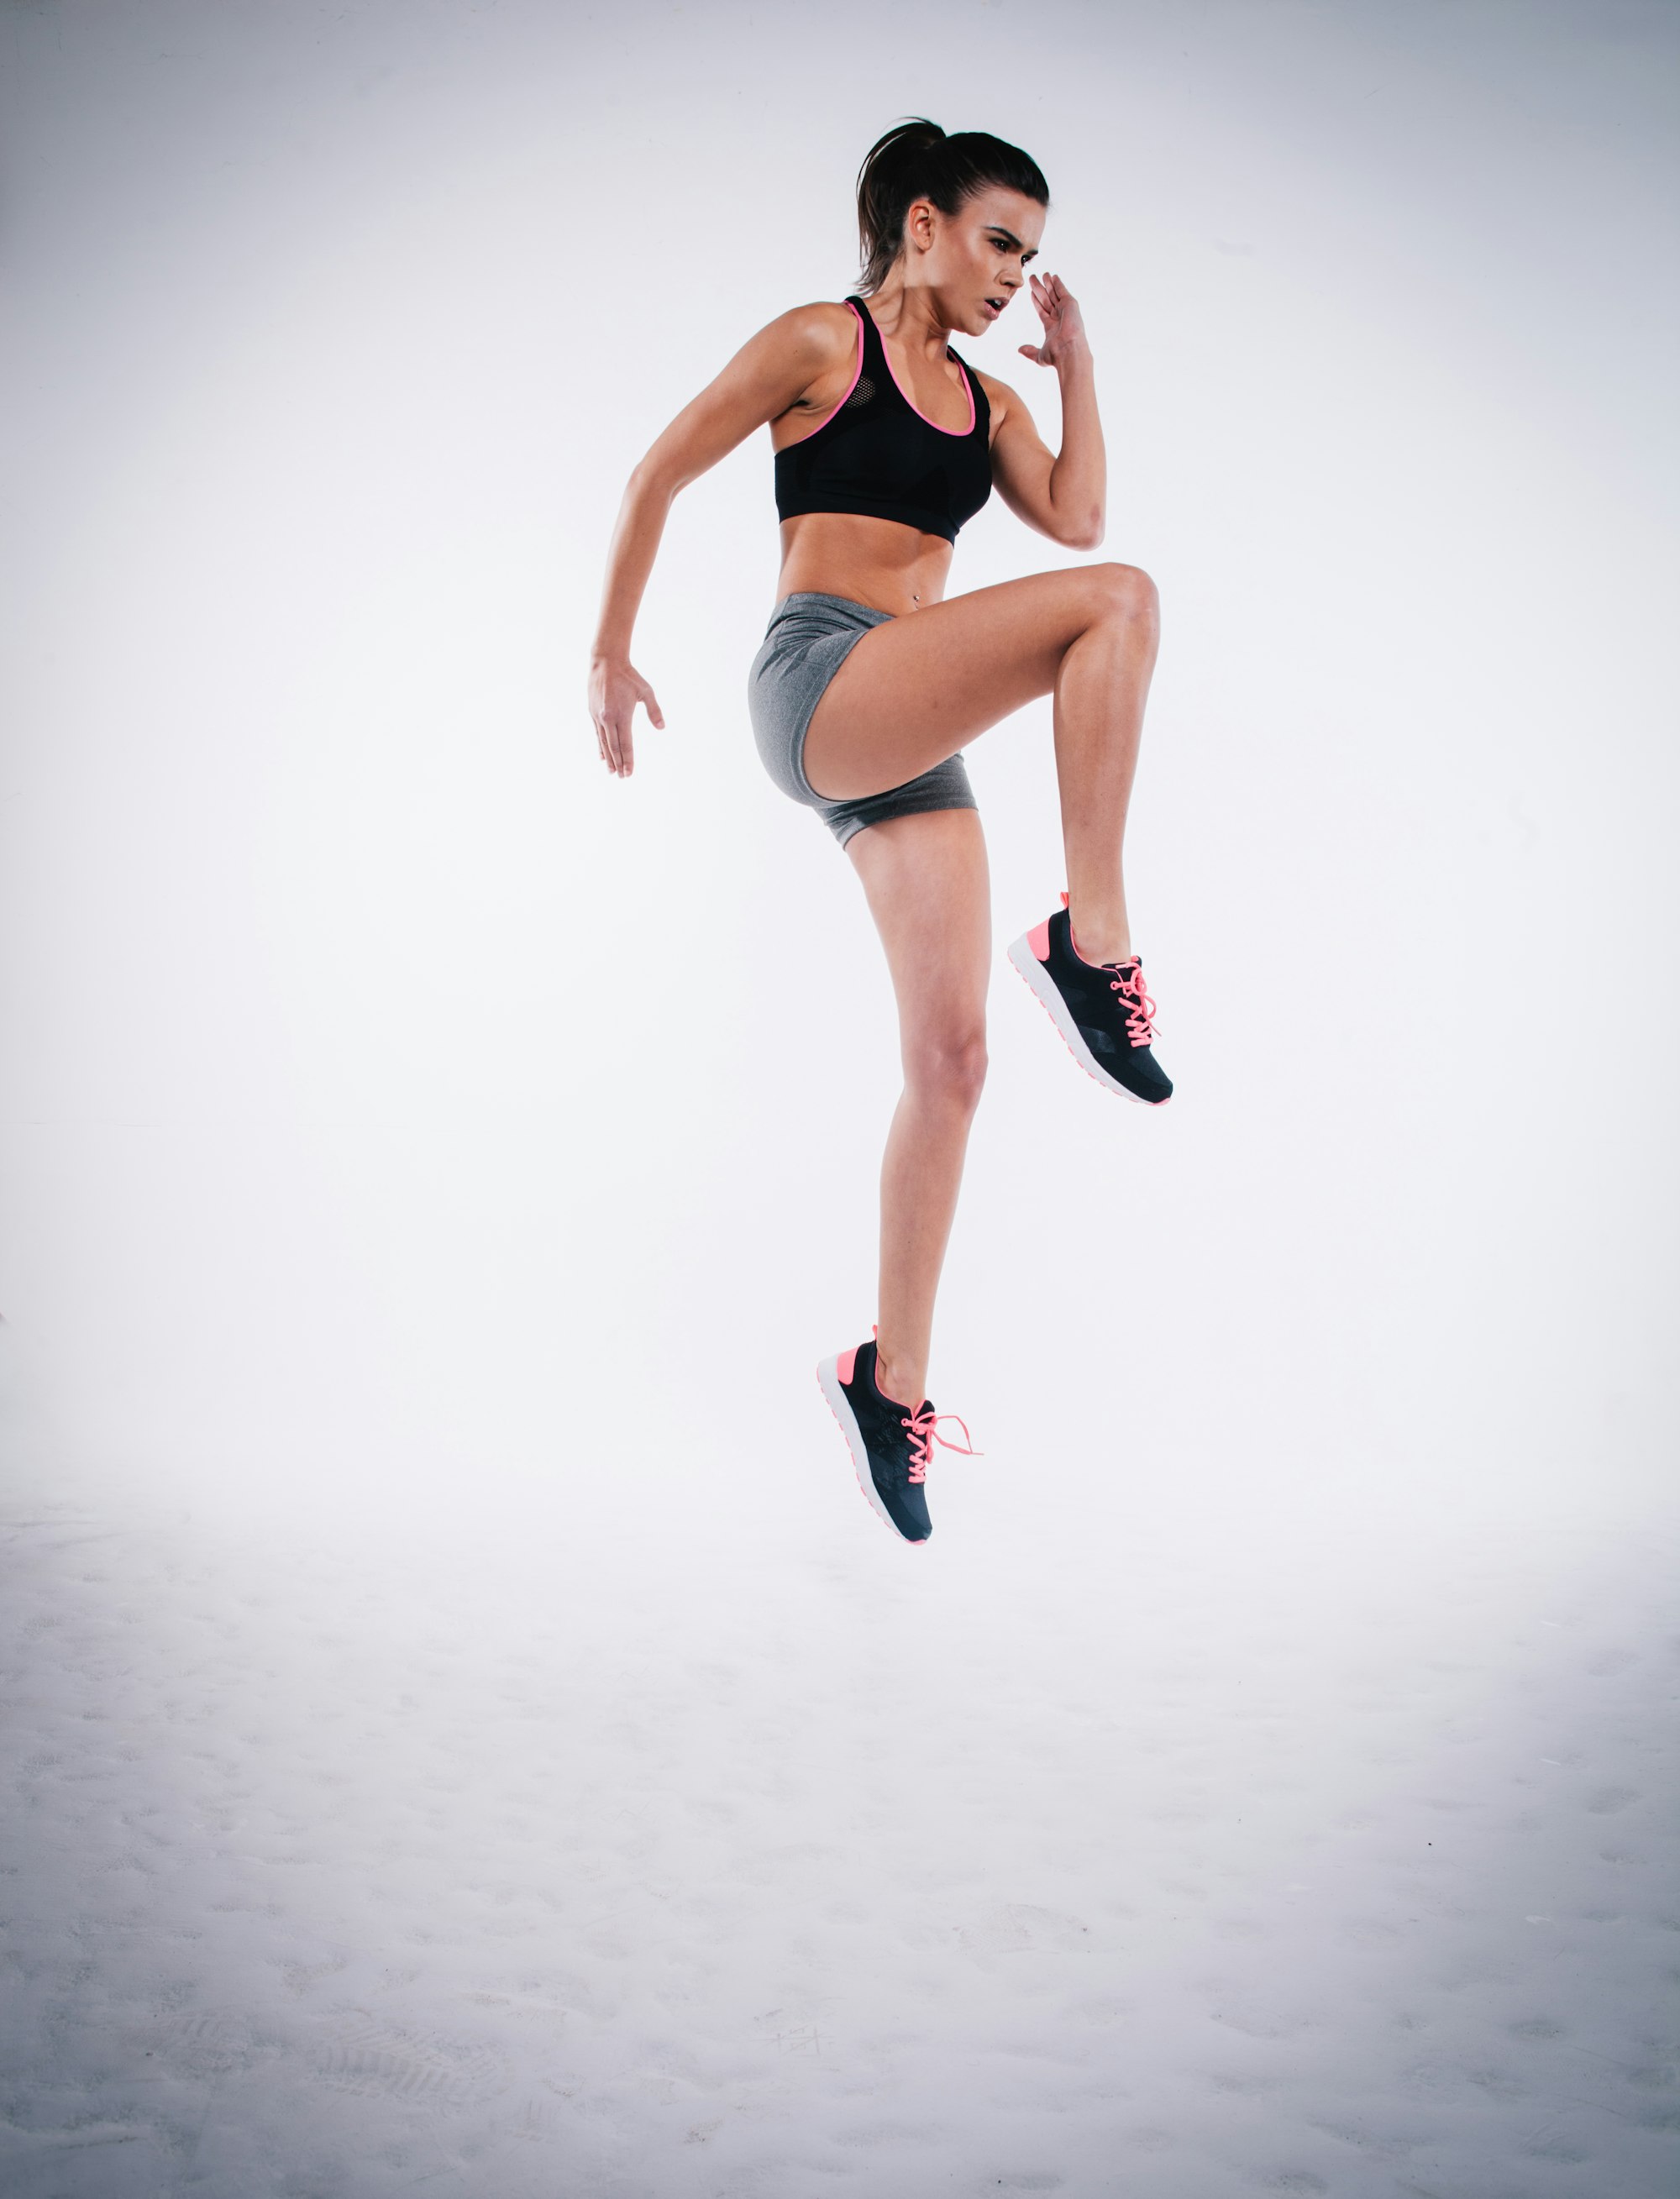 Woman jump lunging